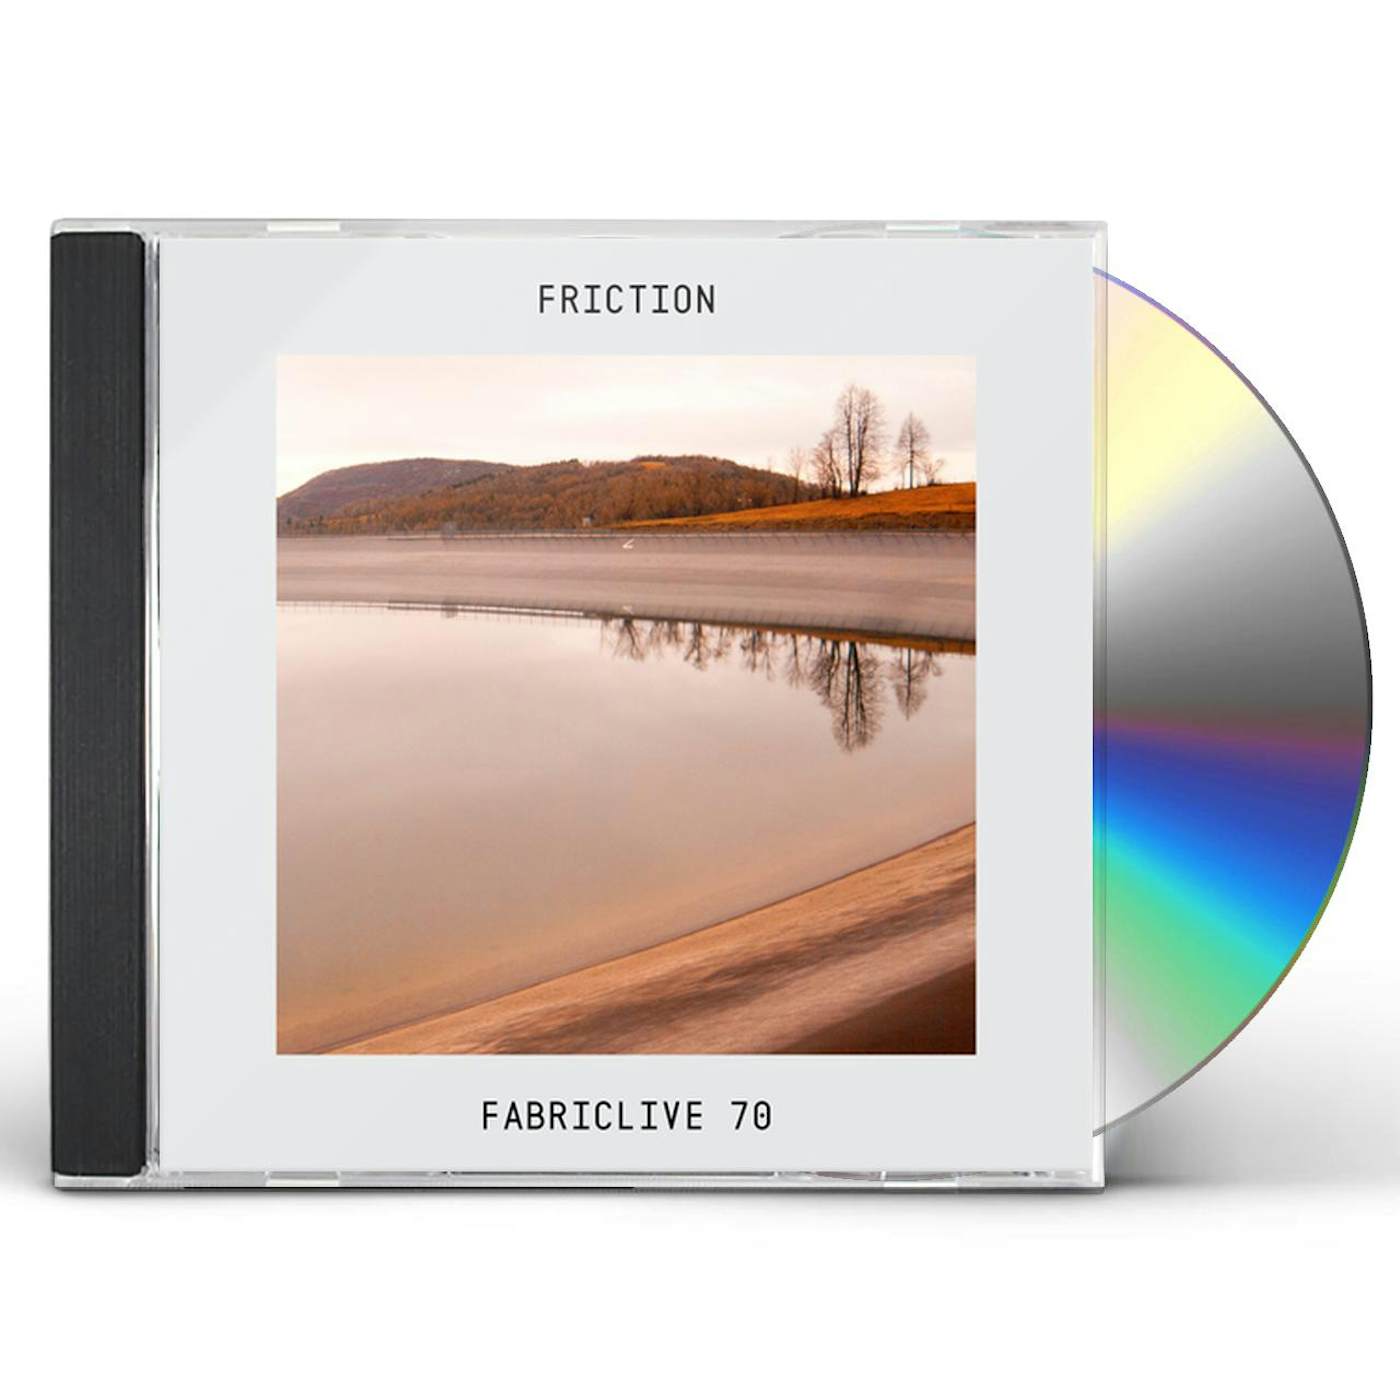 FABRICLIVE 70: FRICTION CD